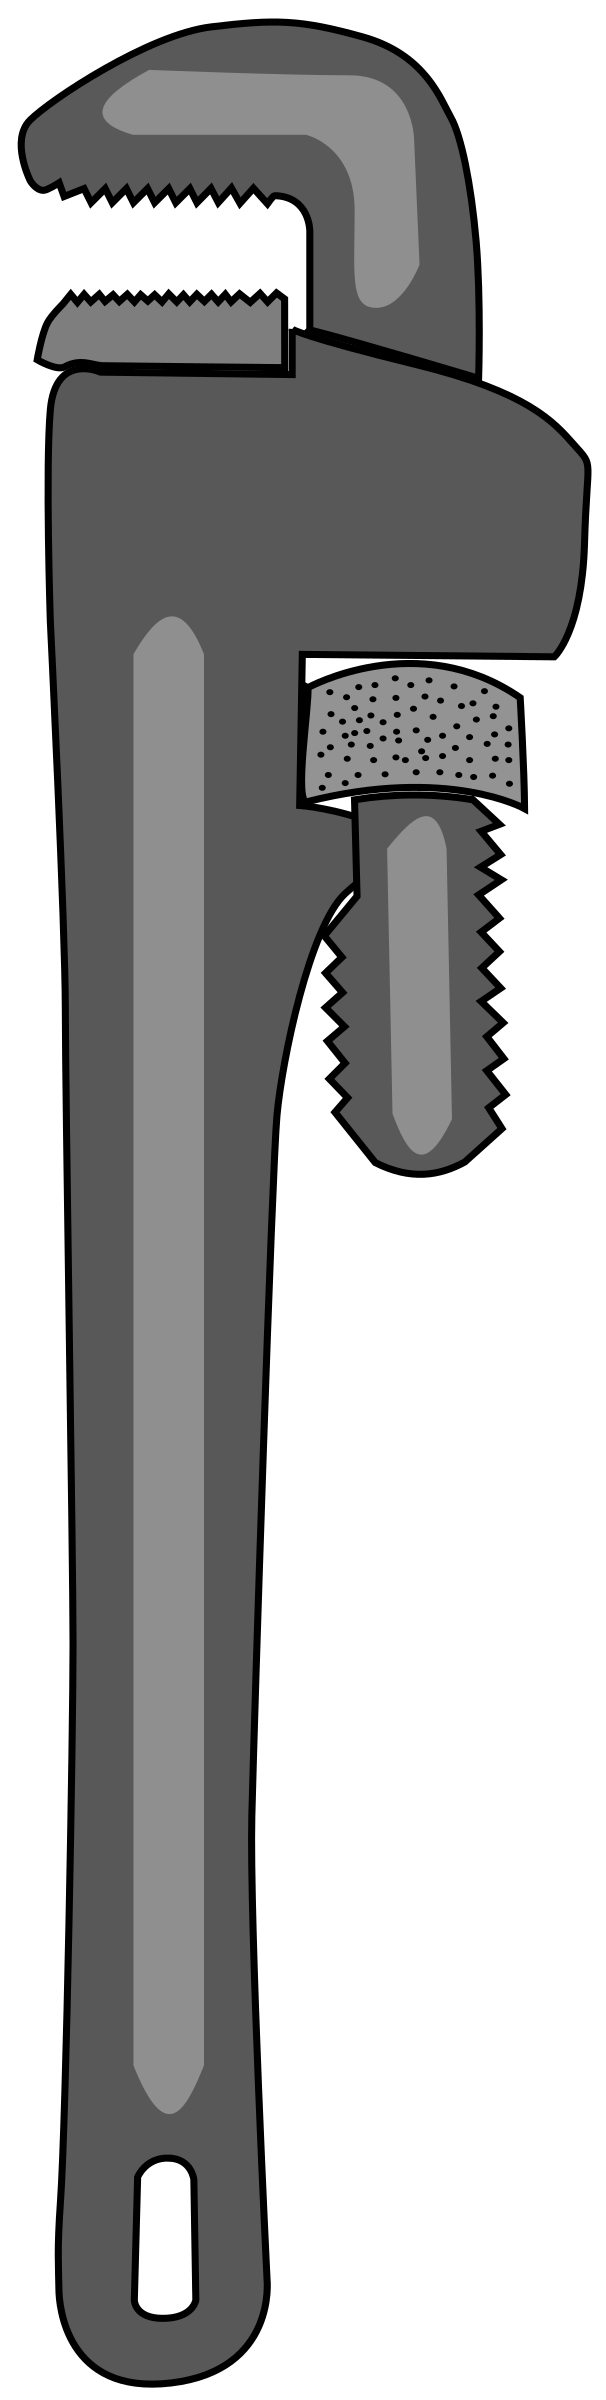 mechanic clipart crescent wrench